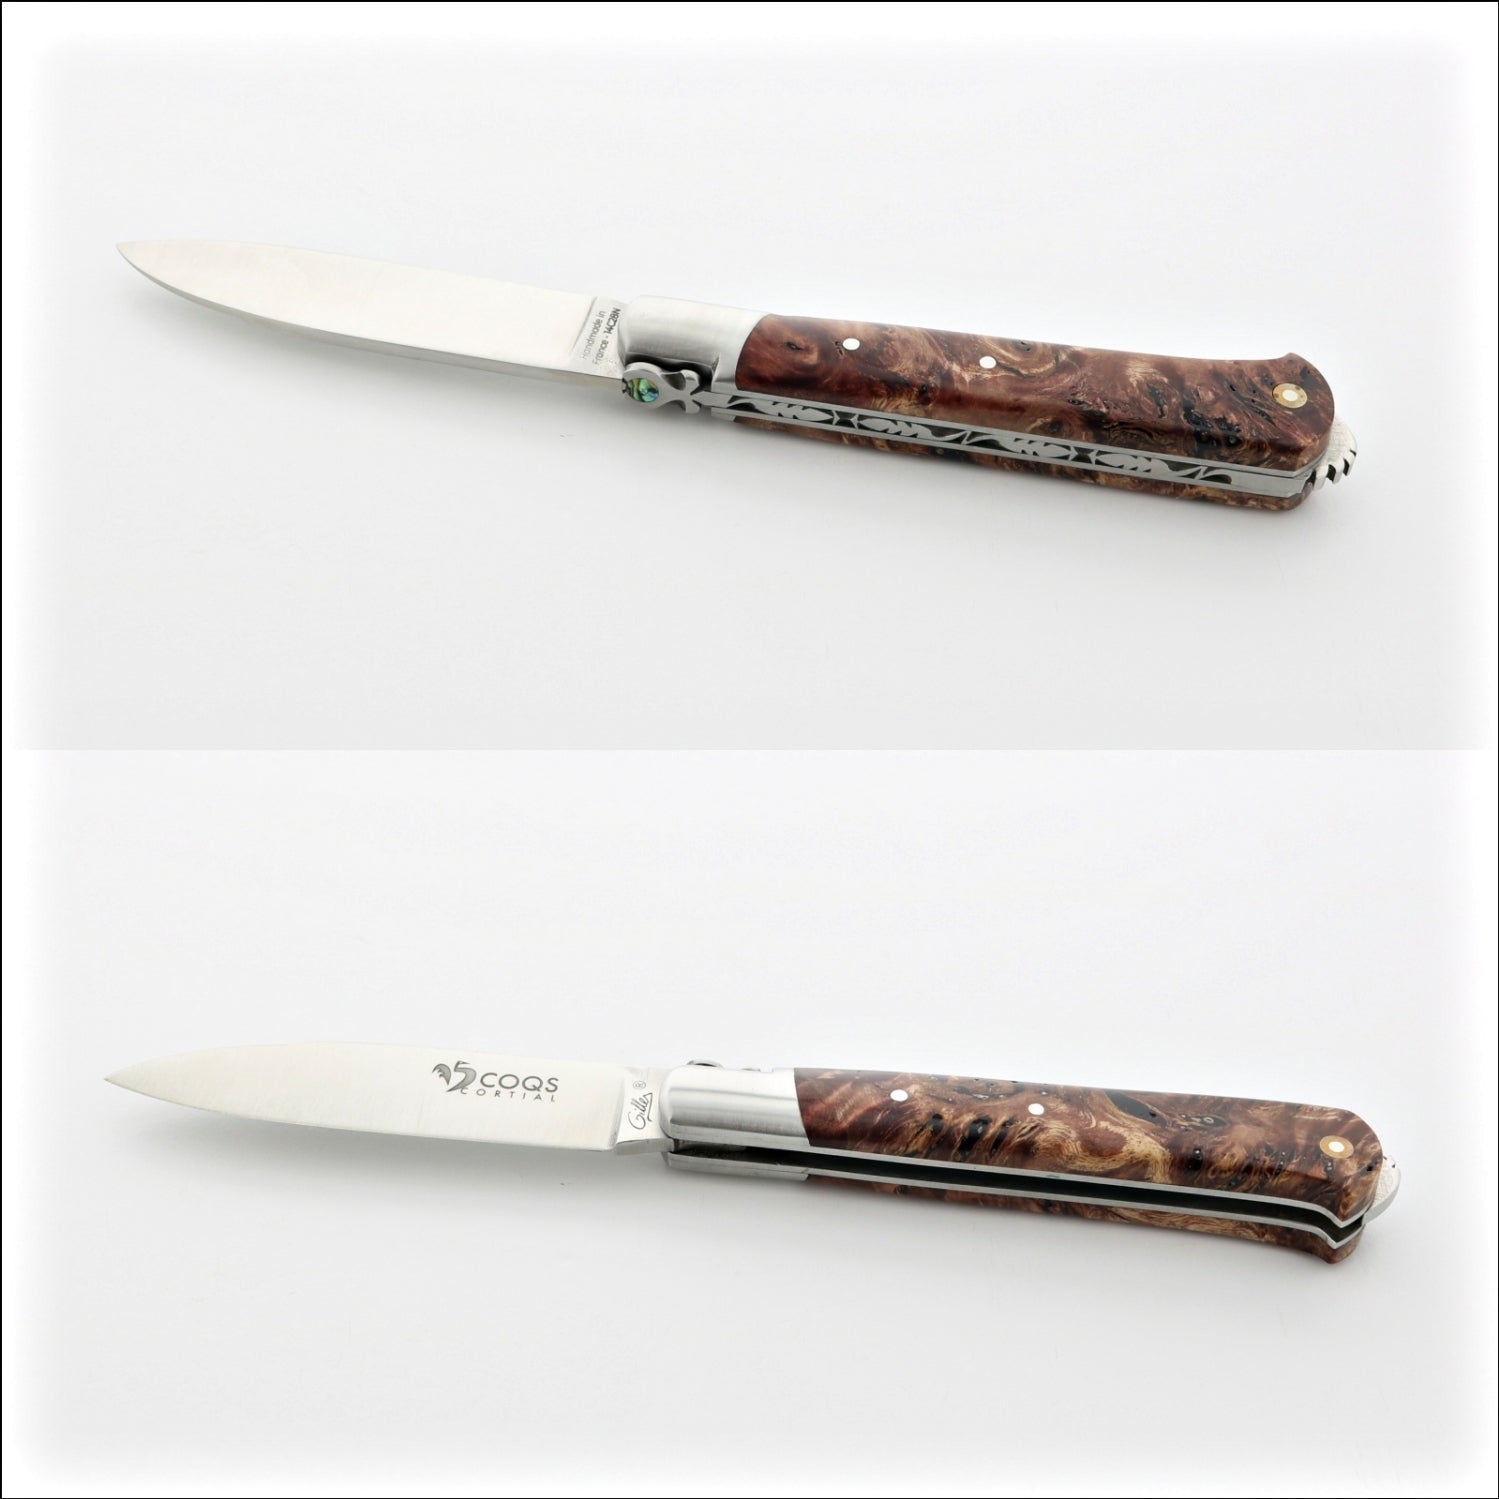 5 Coqs Pocket Knife - Maple Burl Handle & Mother of Pearl Inlay